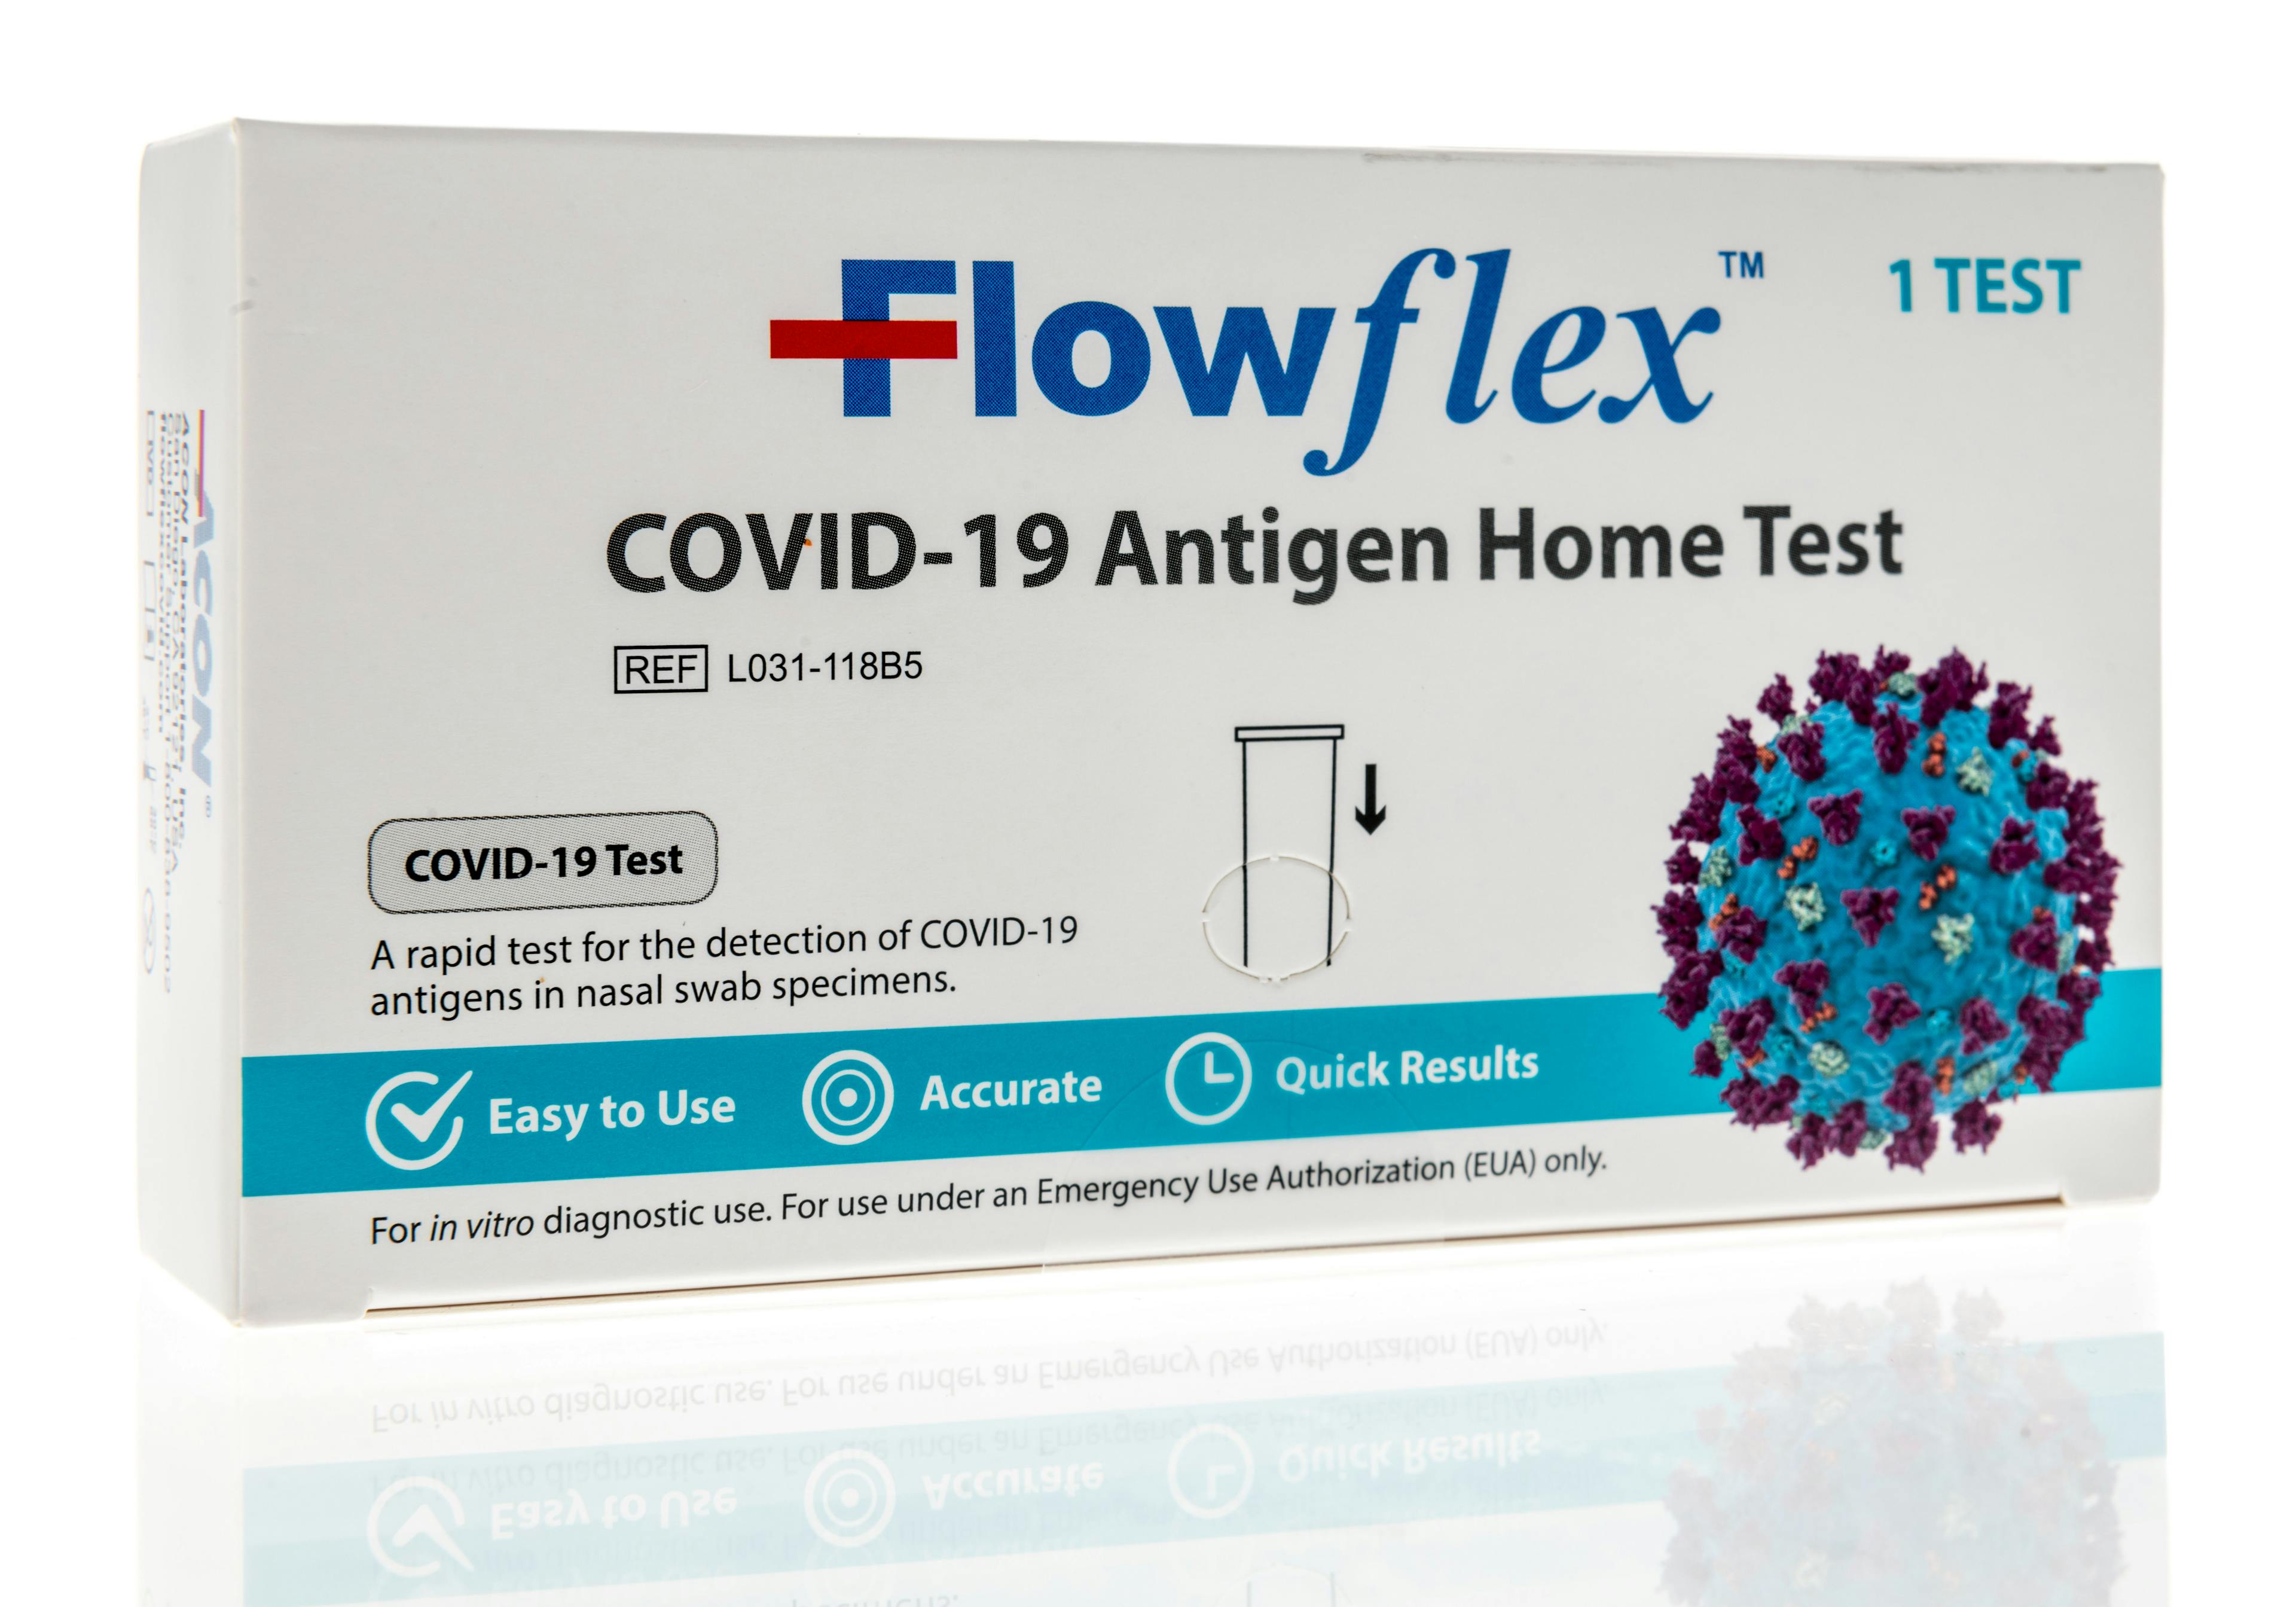 First OTC Rapid Antigen Test for COVID-19 Cleared By FDA